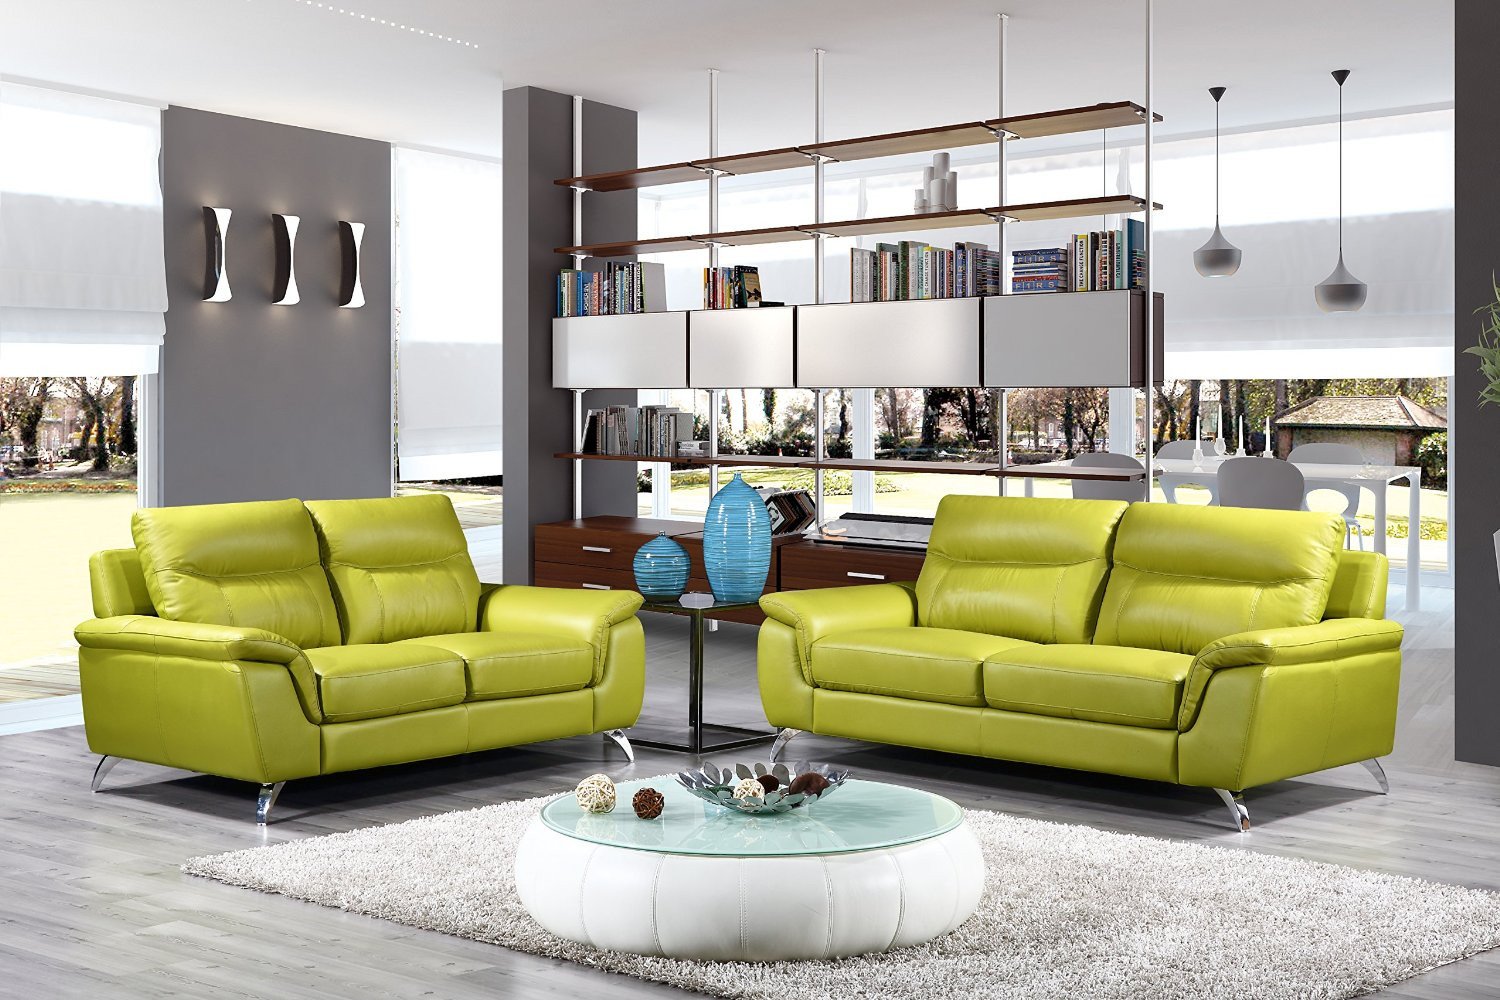 Lime Green Living Room Design With Fresh Colors